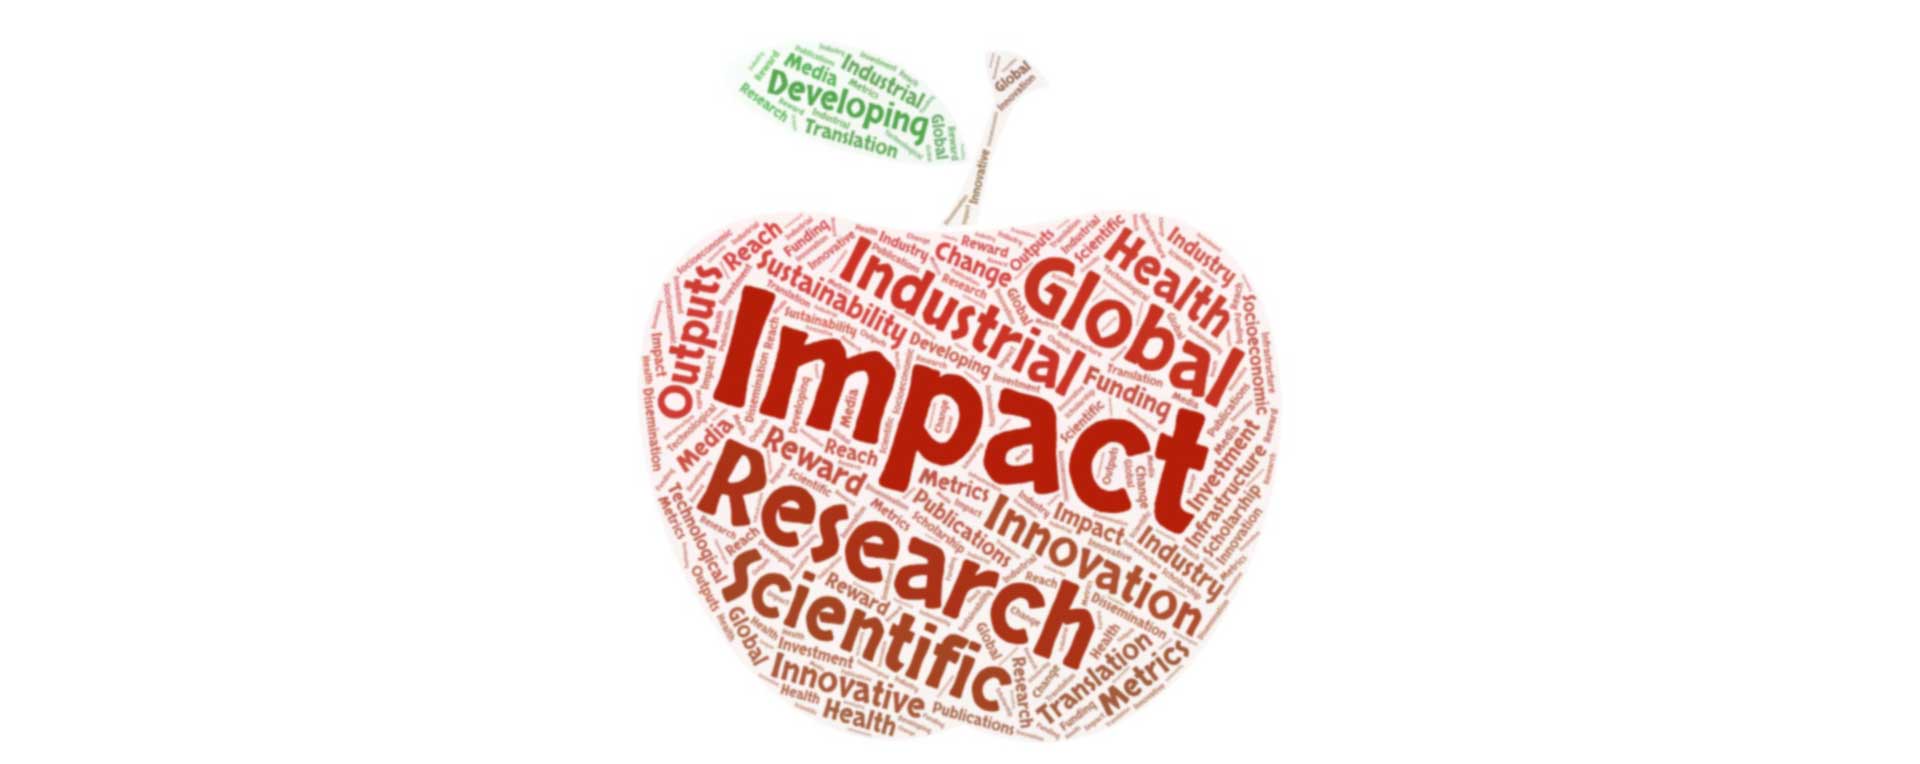 Word art image highlighting key terms Impact, Research, Scientific,Outputs,Reach, Sustainability, Global, Health